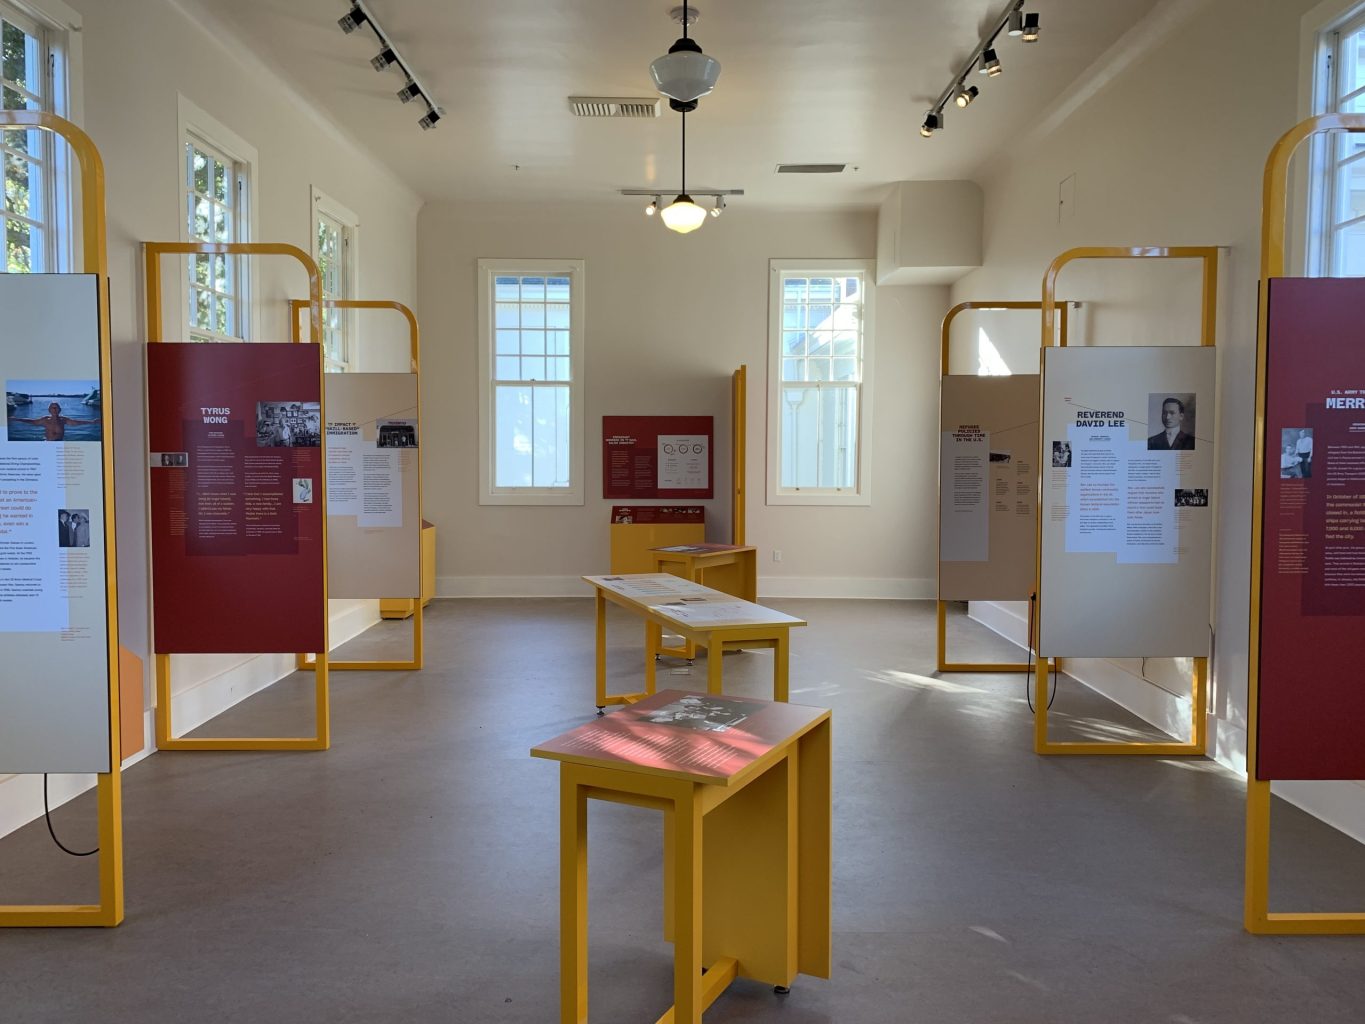 An exhibition of text and images on printed panels.